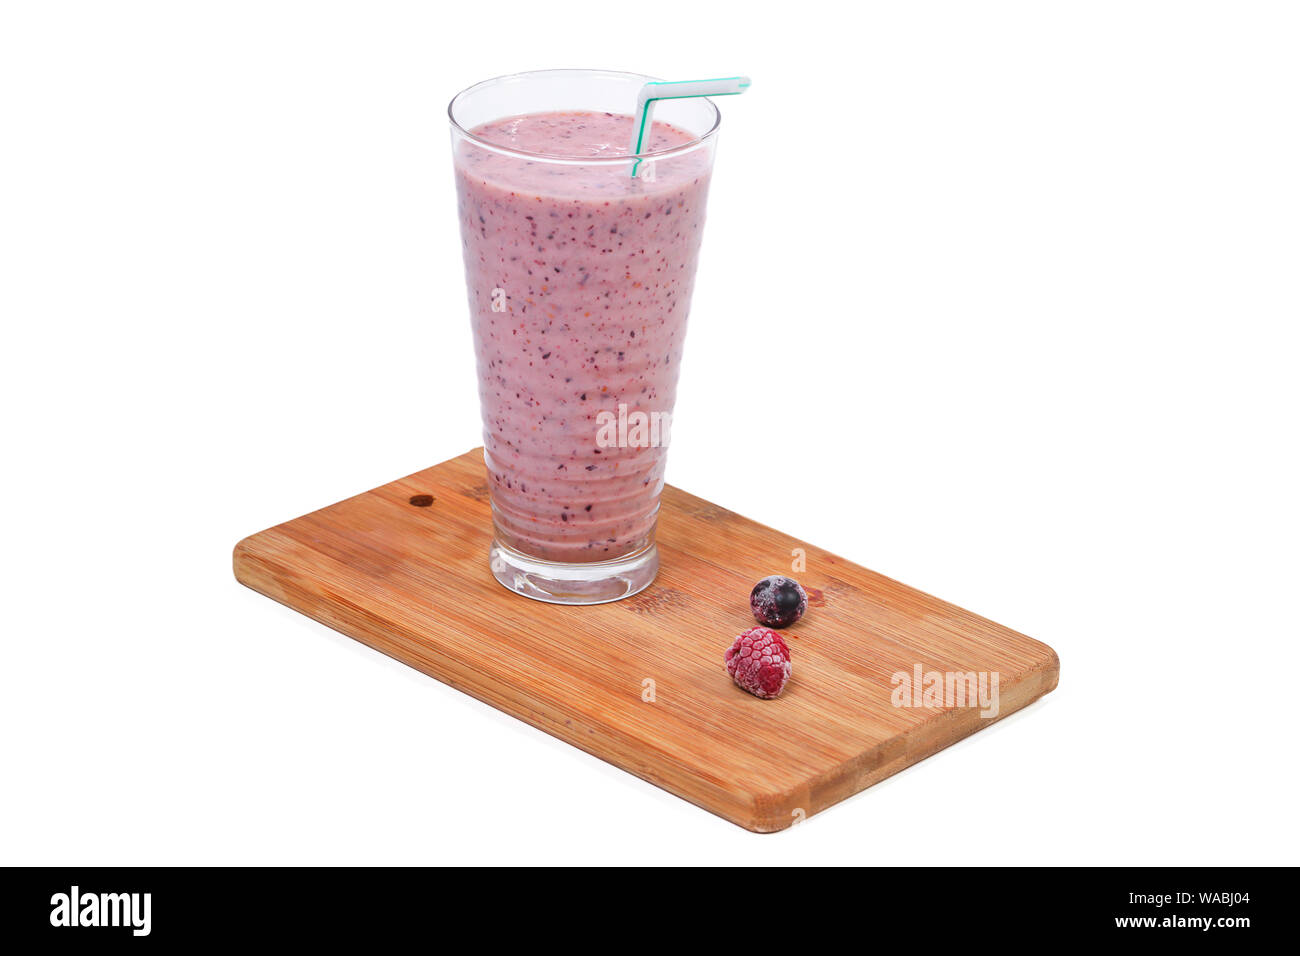 Close up of fruit smoothie with blueberries and raspberries on a wooden plate Stock Photo